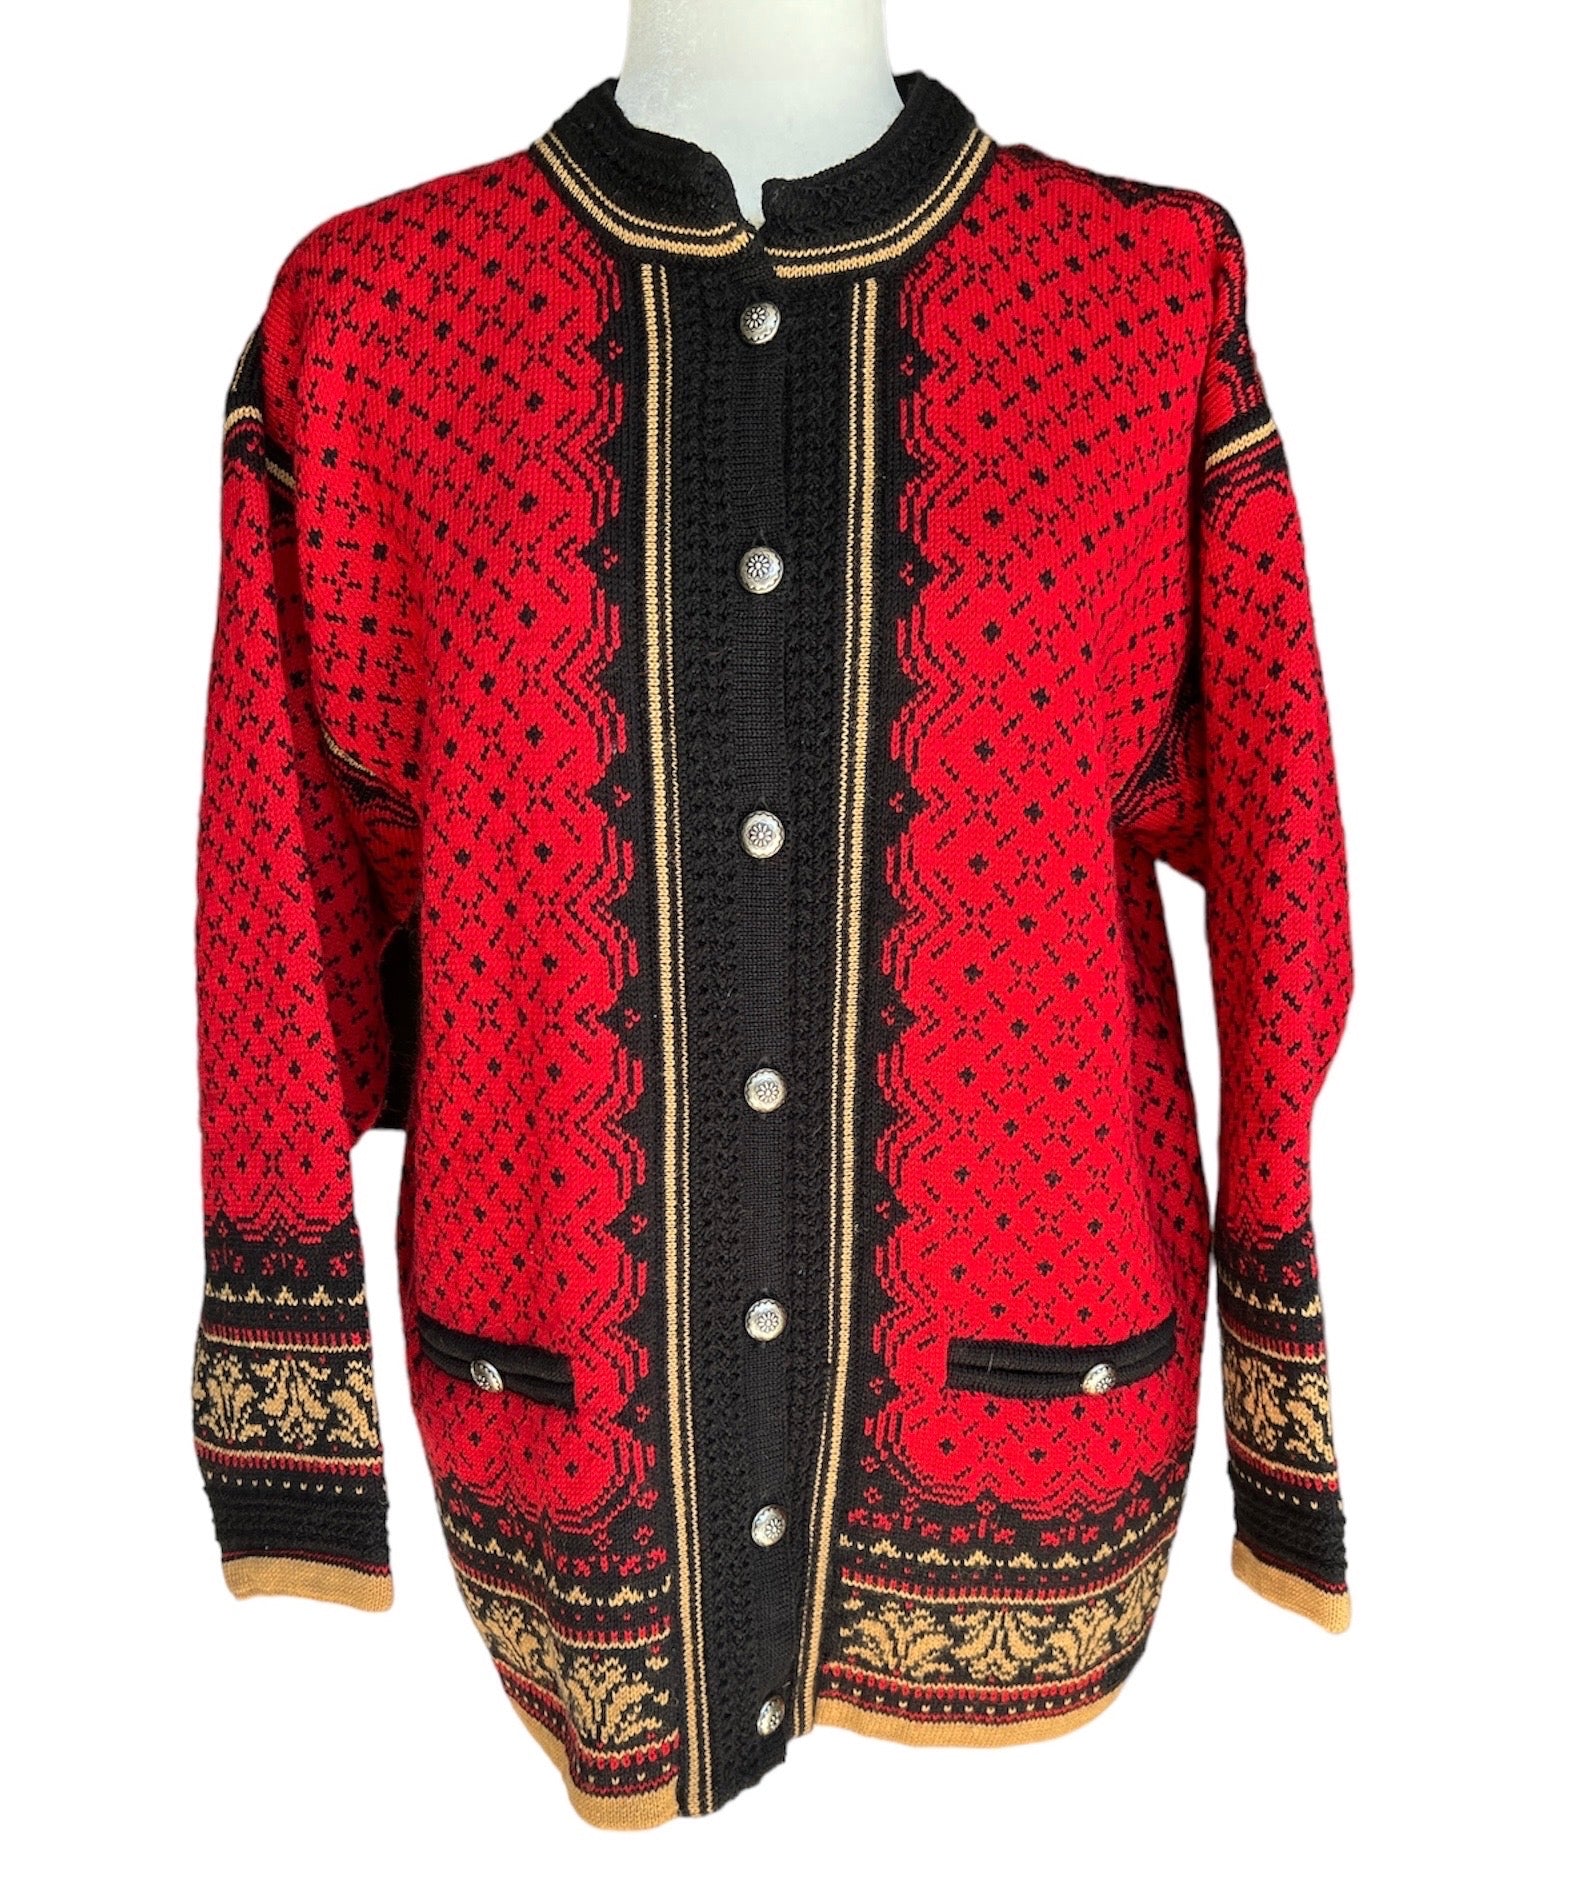 Dale of Norway Red Nordic Cardigan Sweater, M